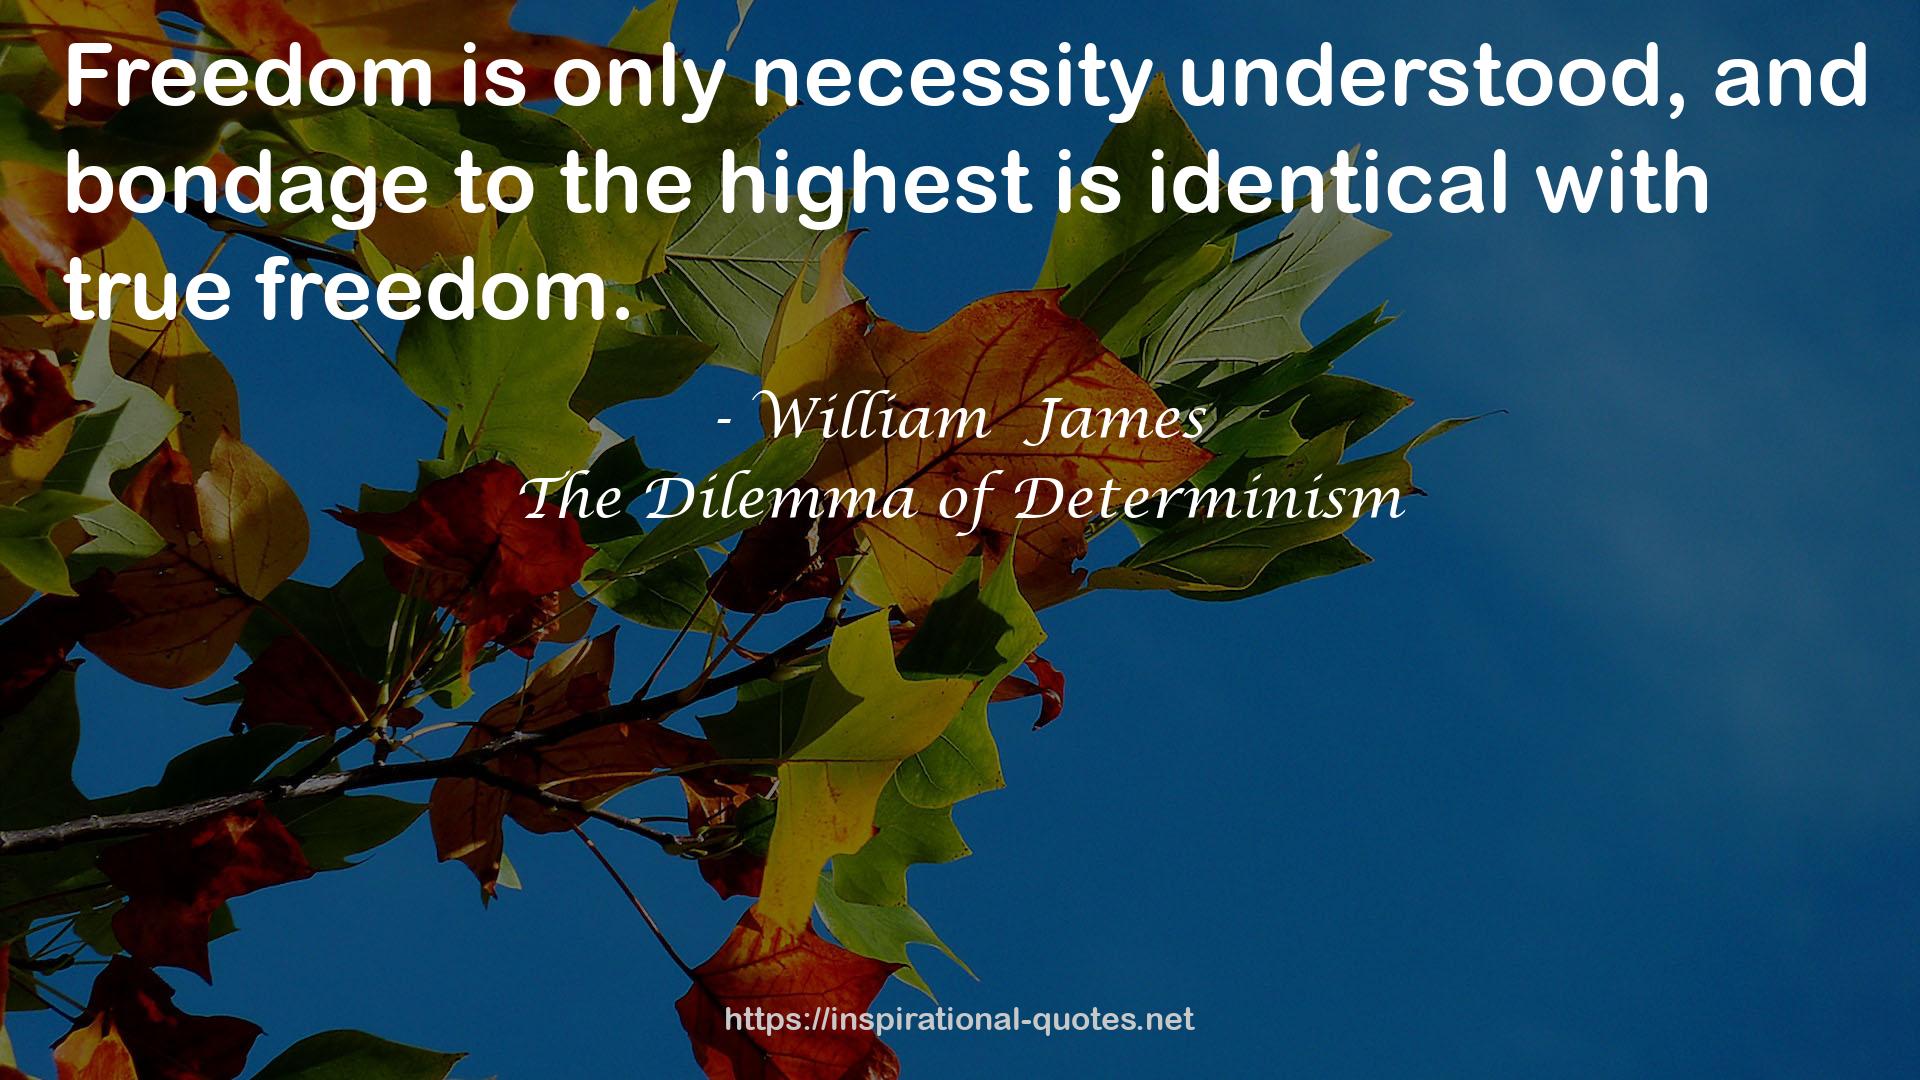 The Dilemma of Determinism QUOTES